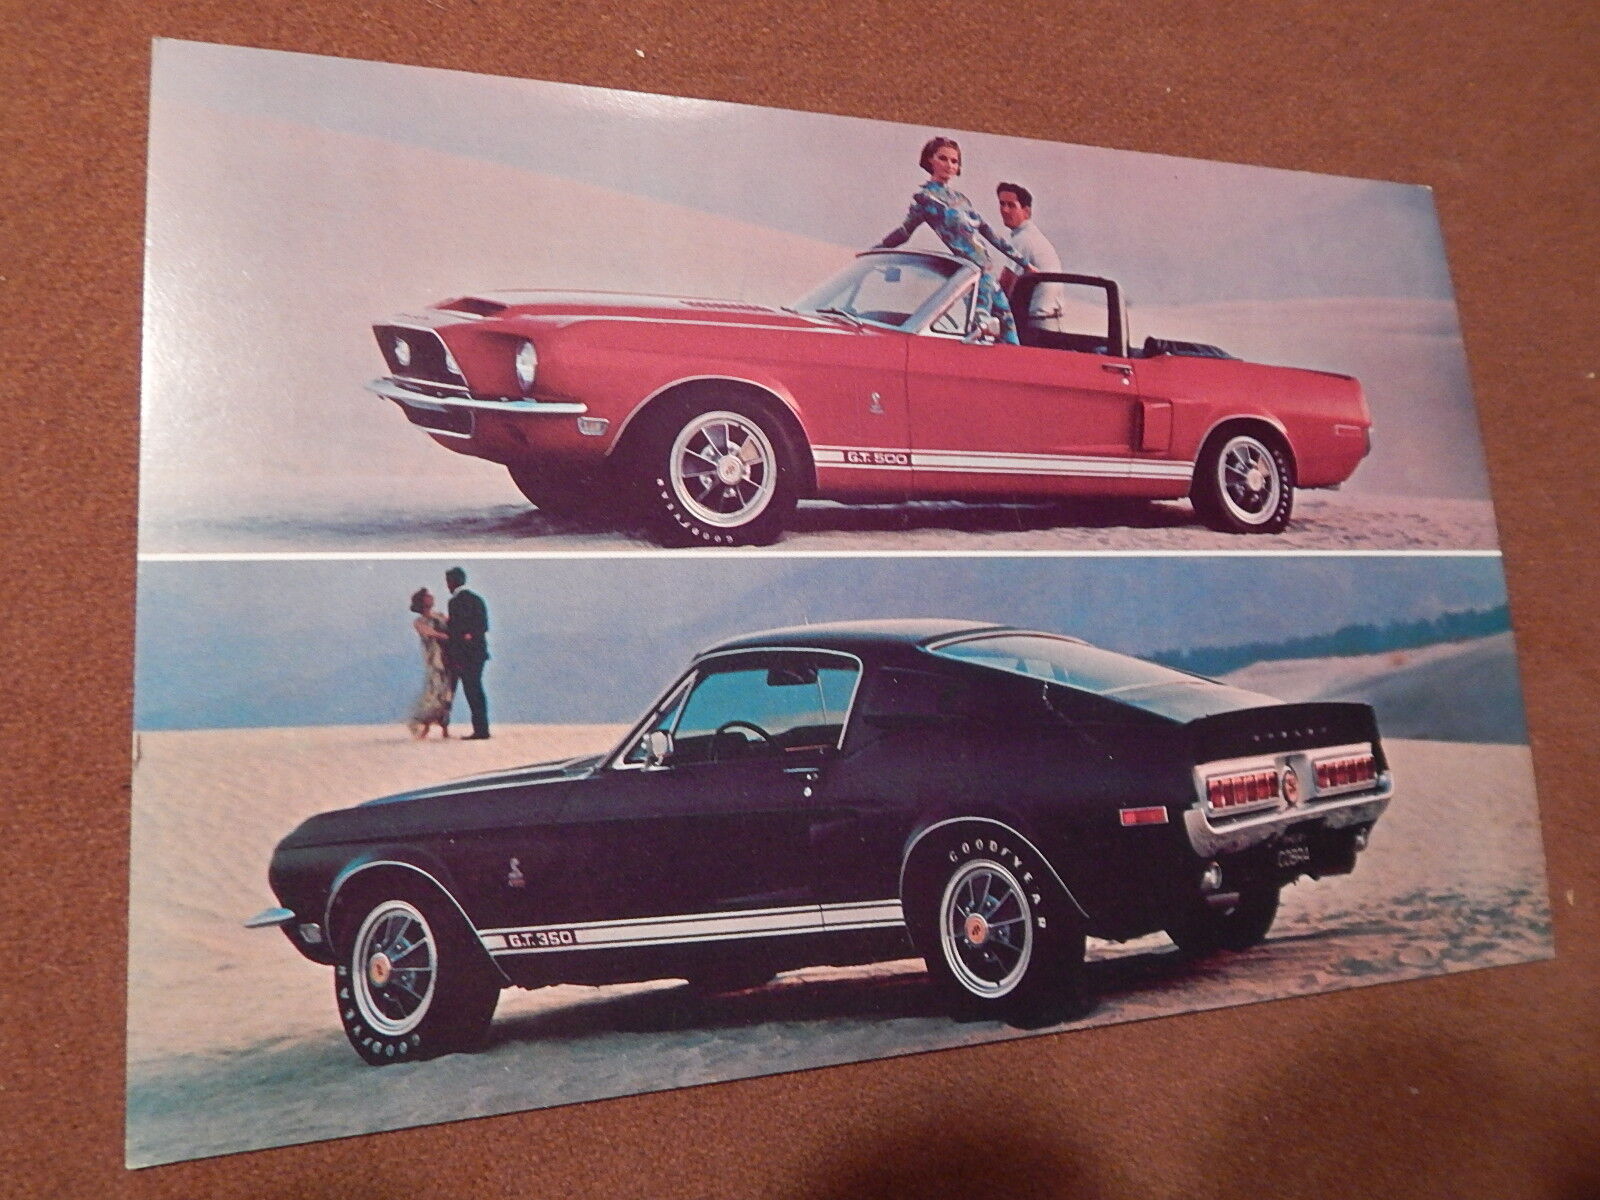 NOS 68 MUSTANG SHELBY COBRA GT 350 500 SALES MAILER BROCHURE 1968 FORD ISSUE